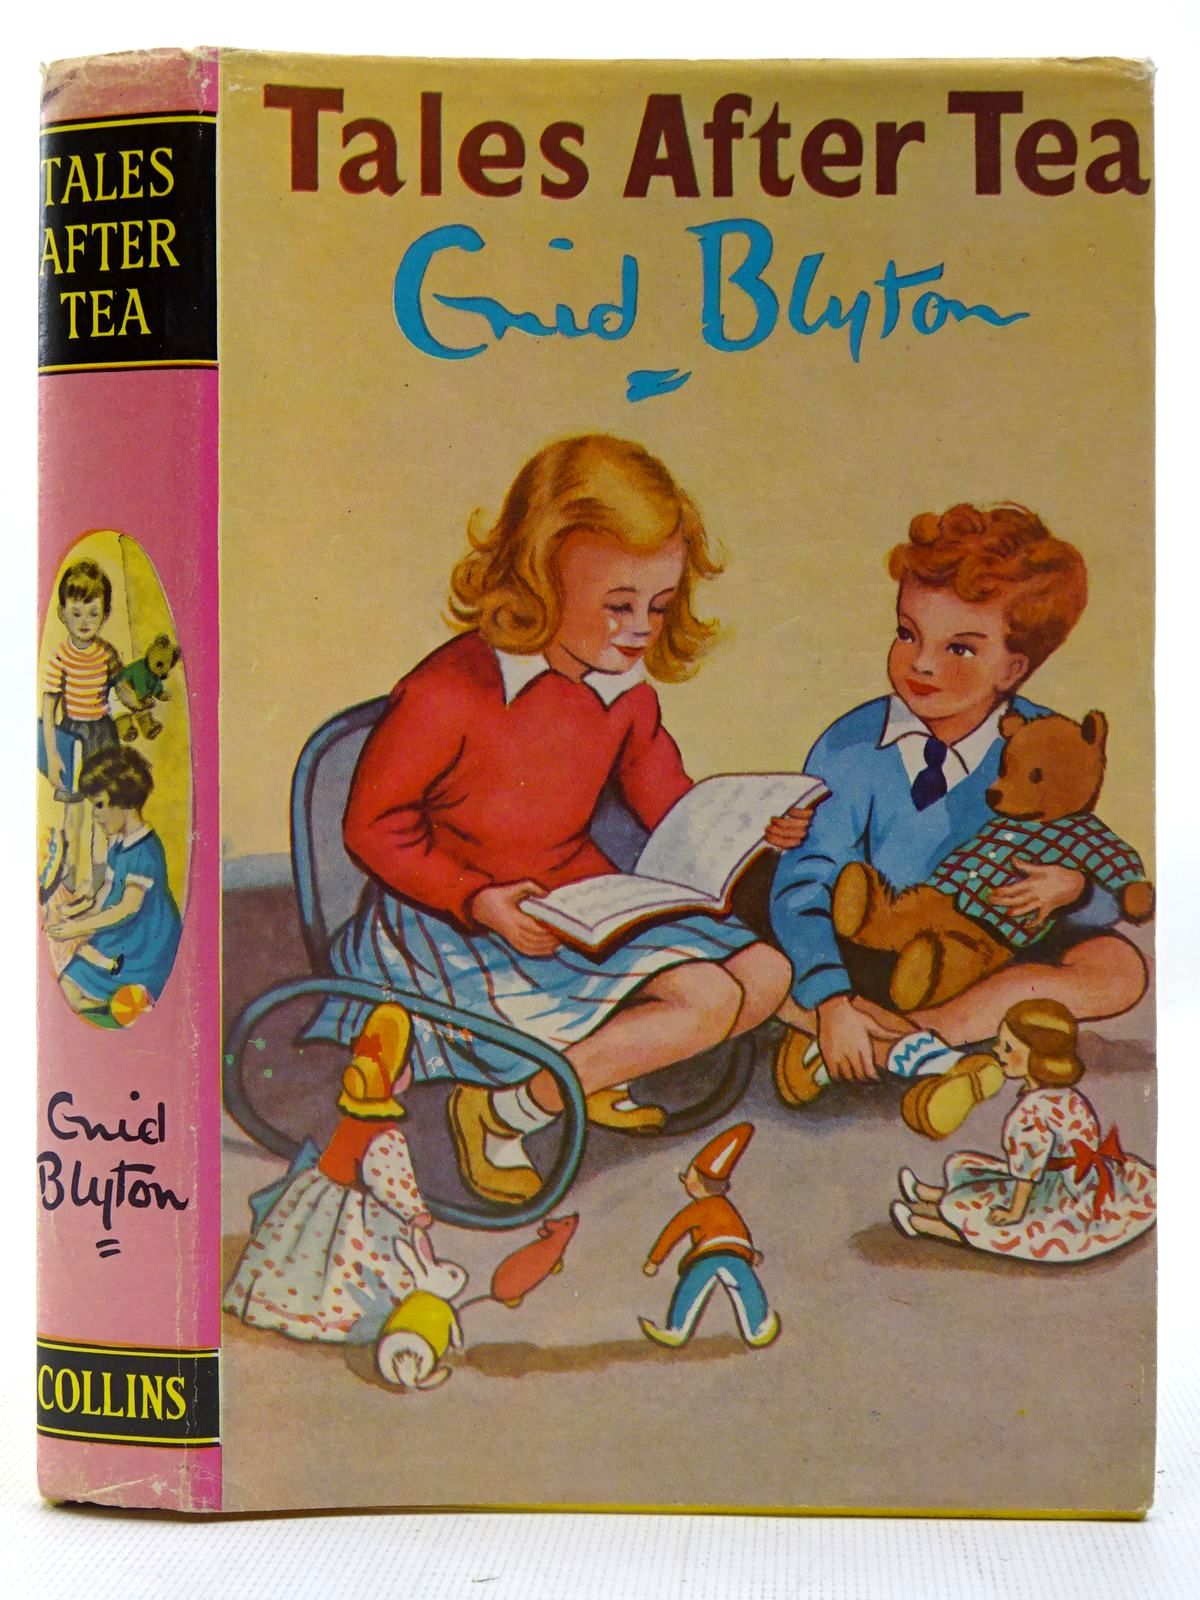 Cover of TALES AFTER TEA by Enid Blyton